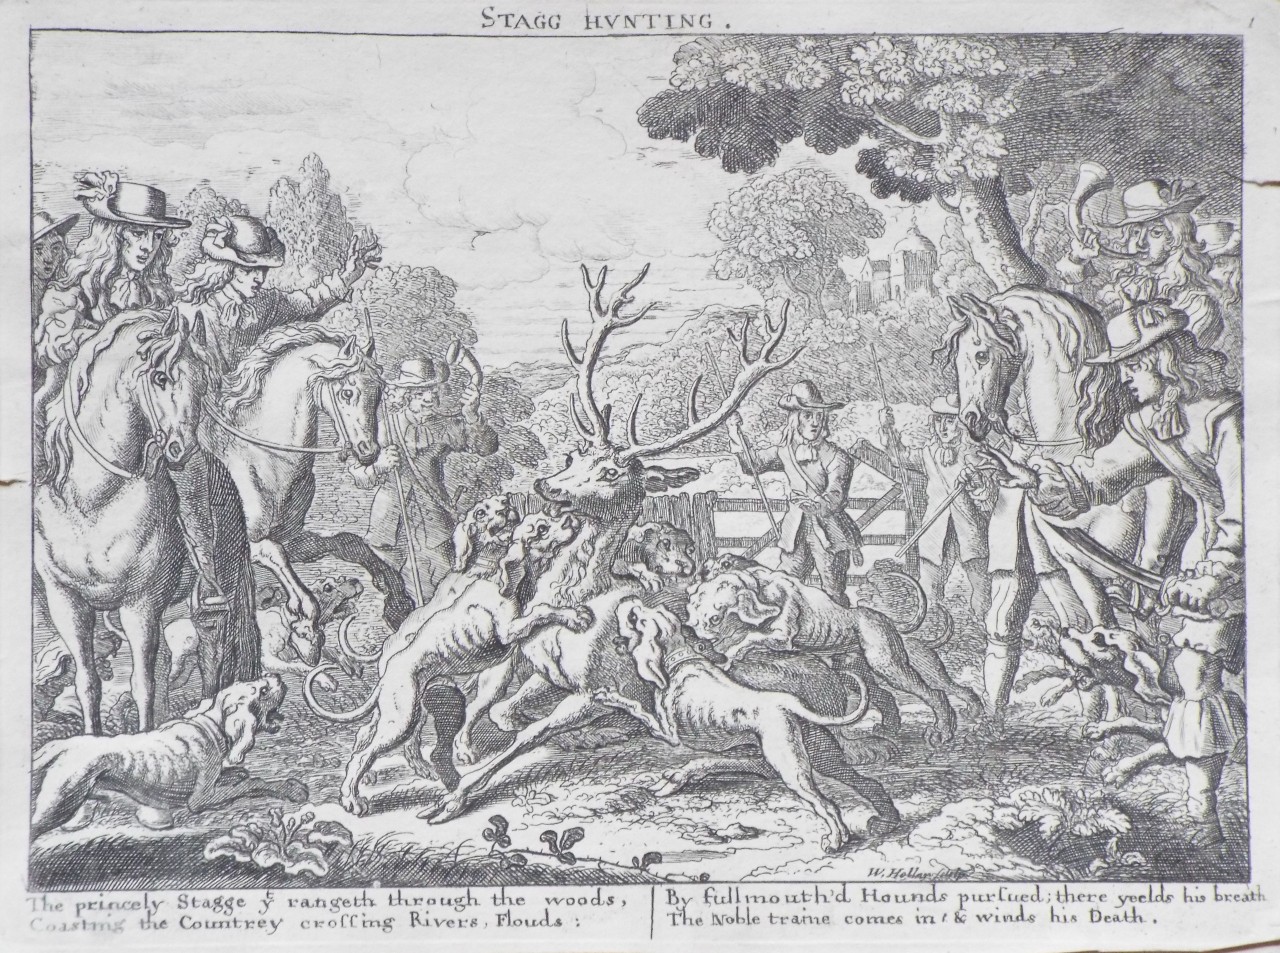 Etching - Stagg Hunting. - Hollar